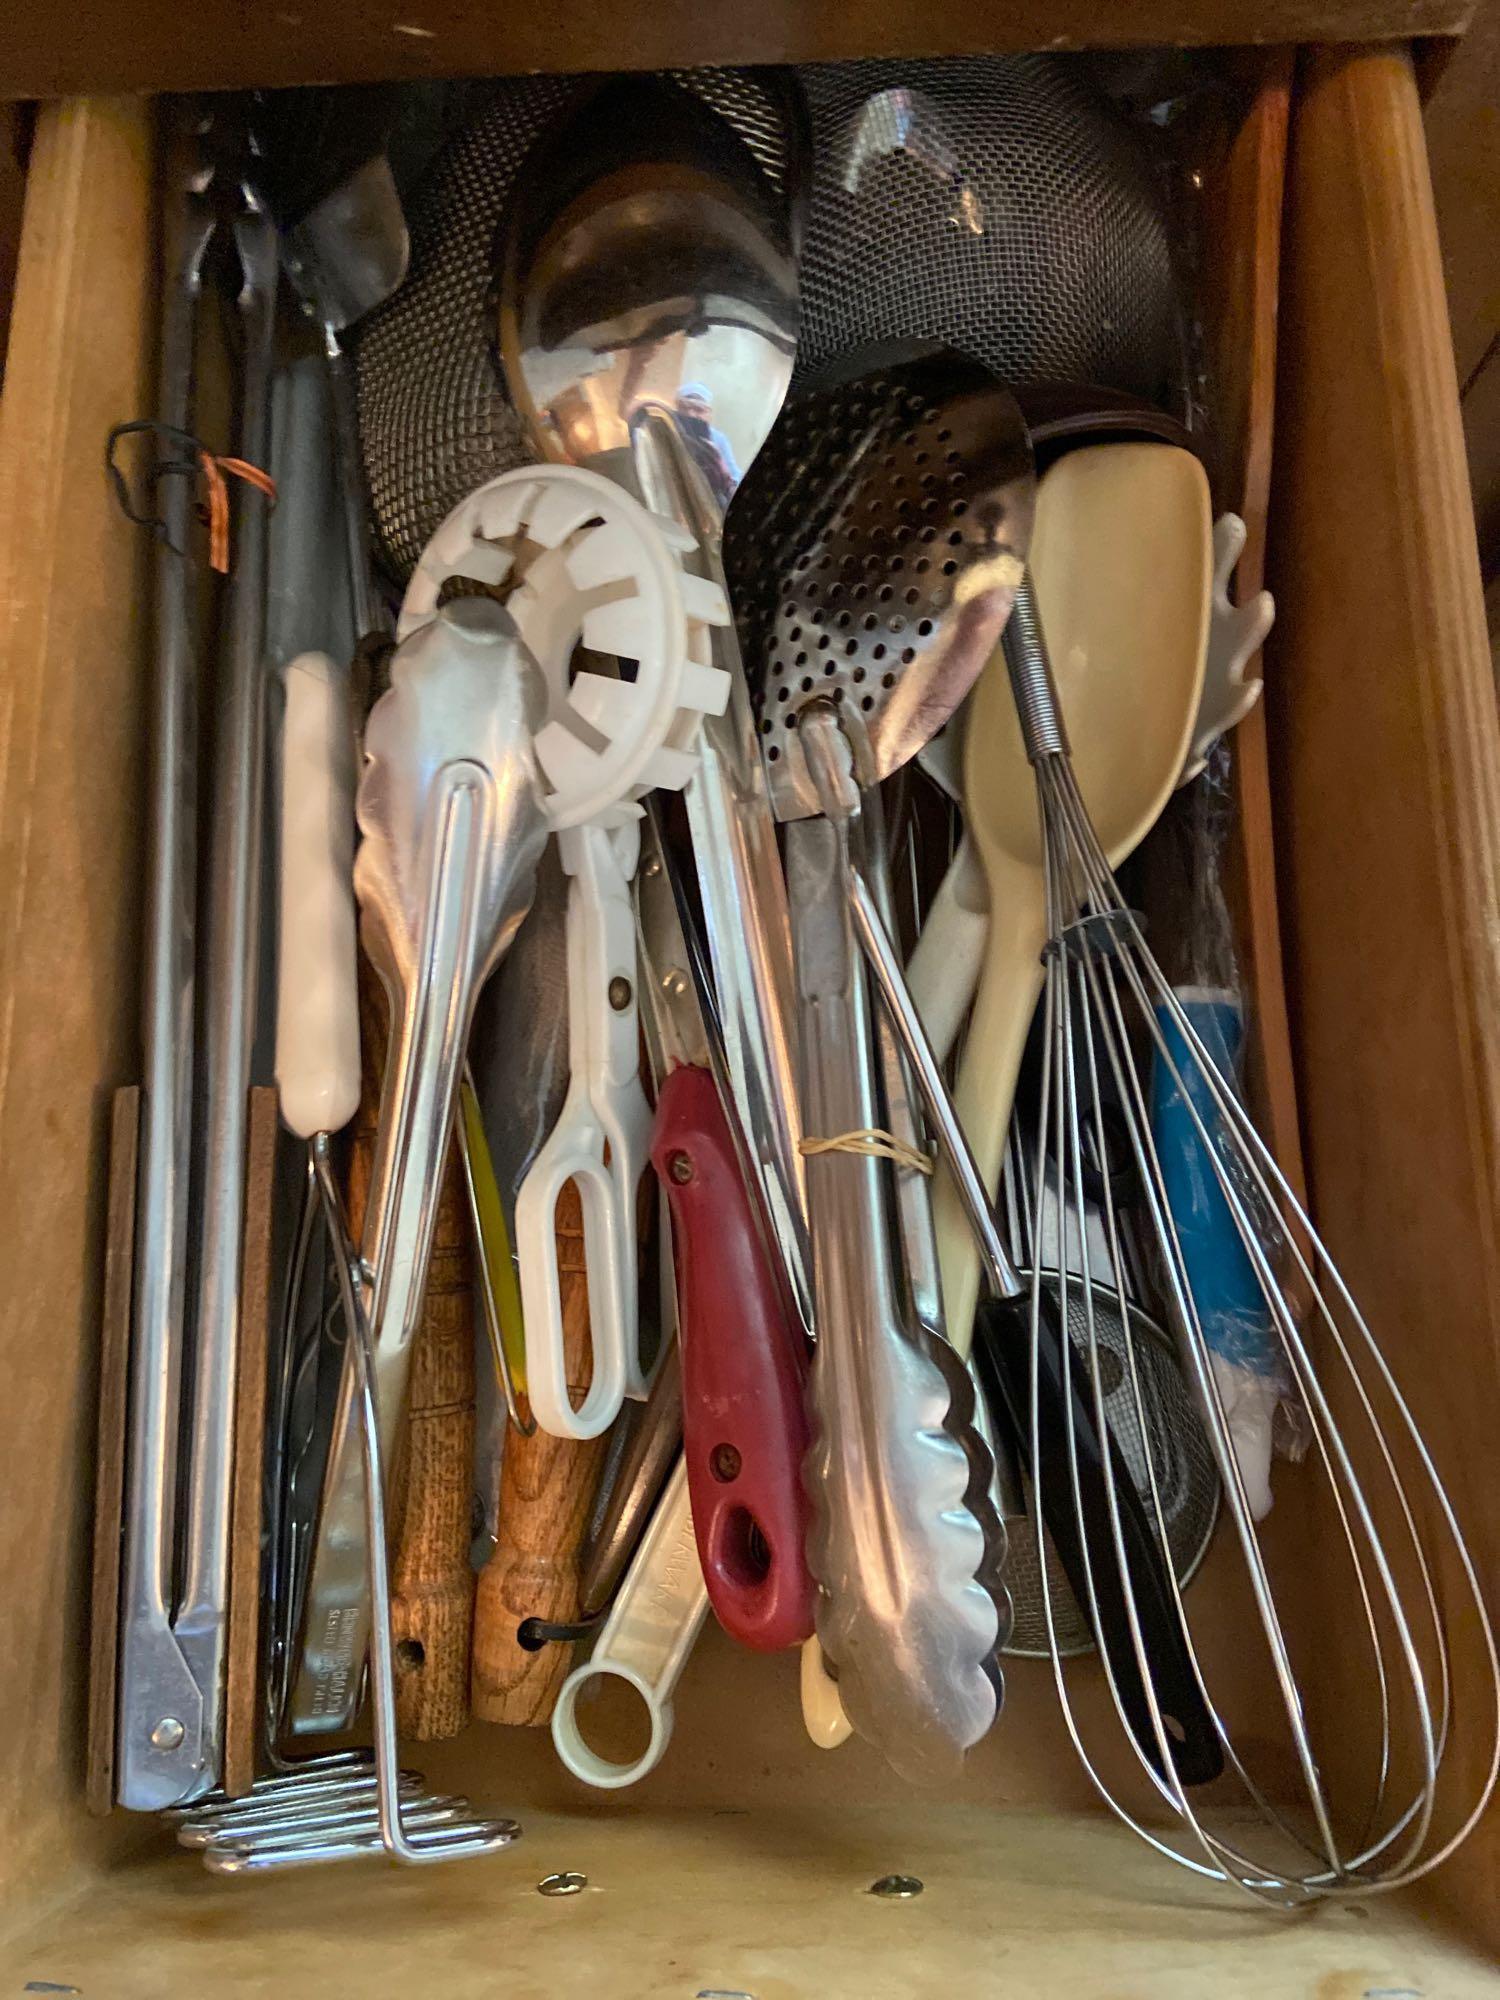 Contents of Bottom Kitchen Cabinets